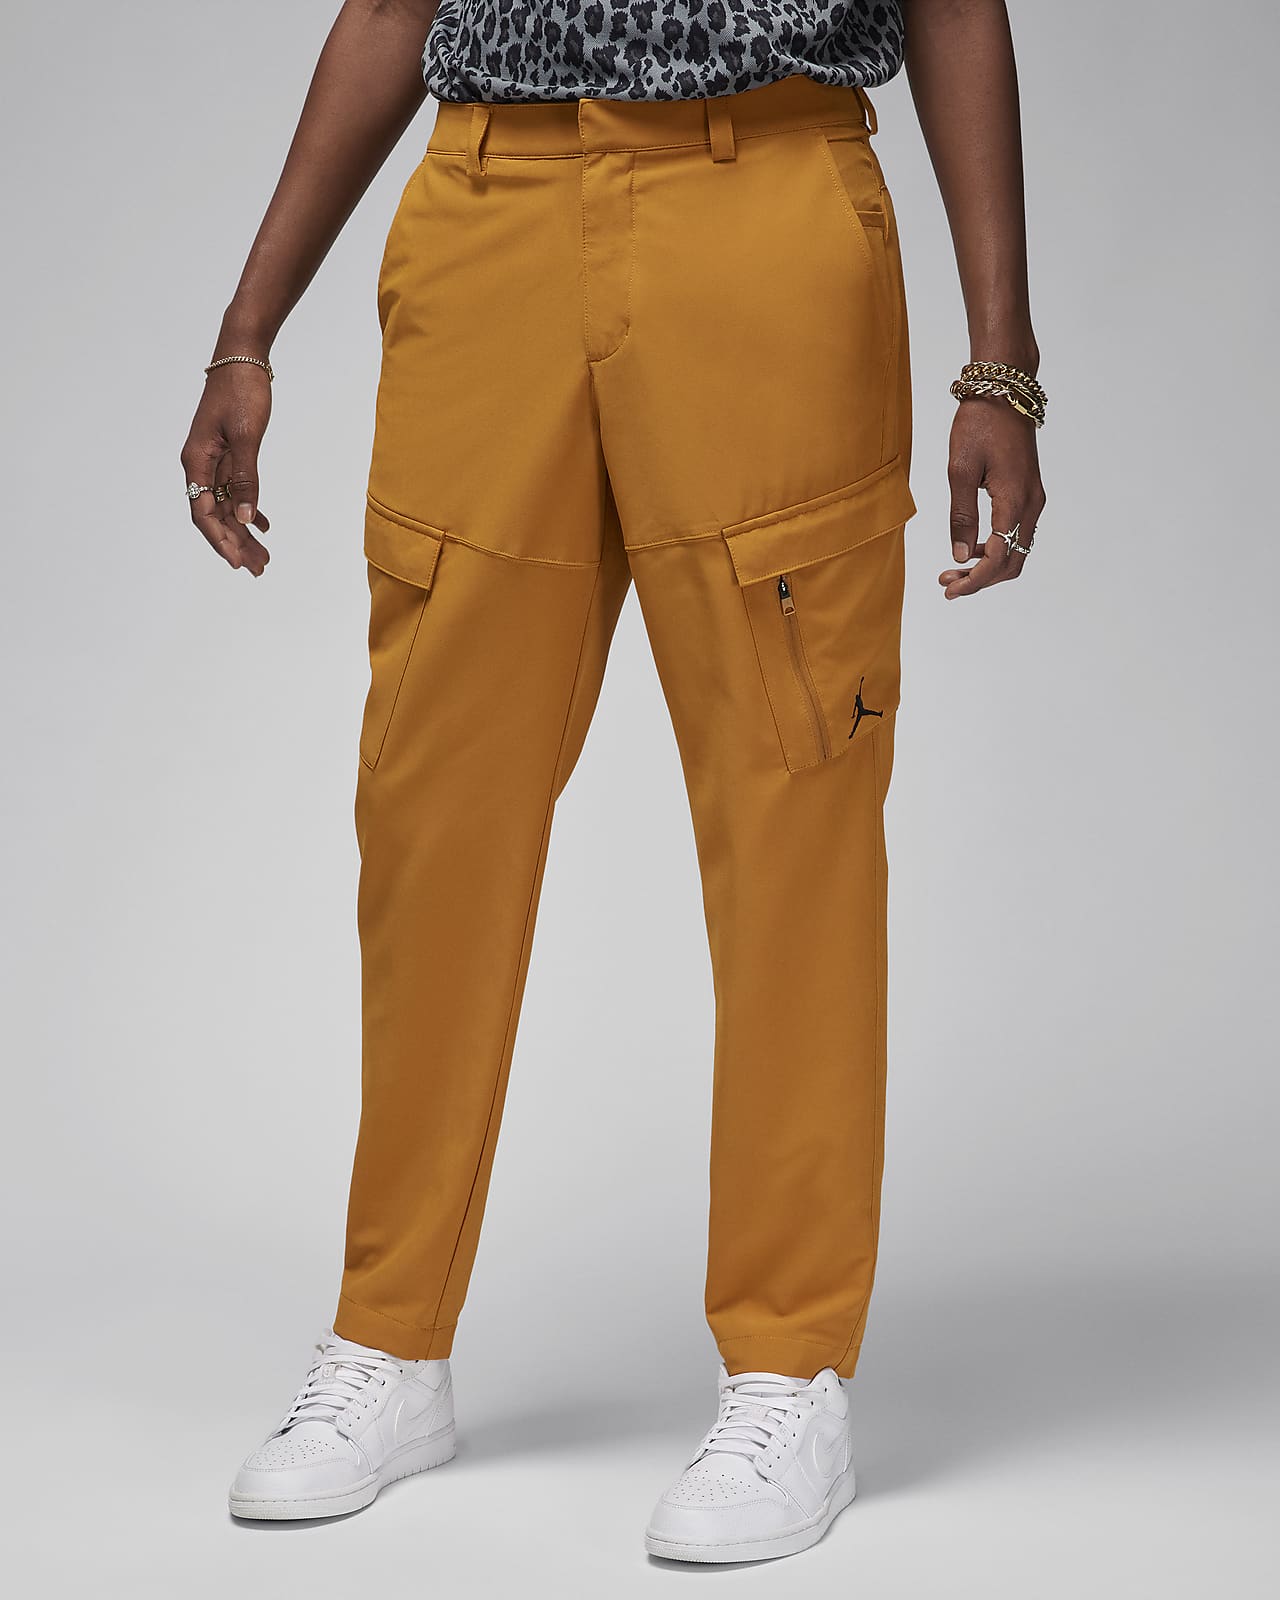 Men's 36 in. x 32 in. Khaki Cotton/Polyester/Spandex Flex Work Pants with 6  Pockets